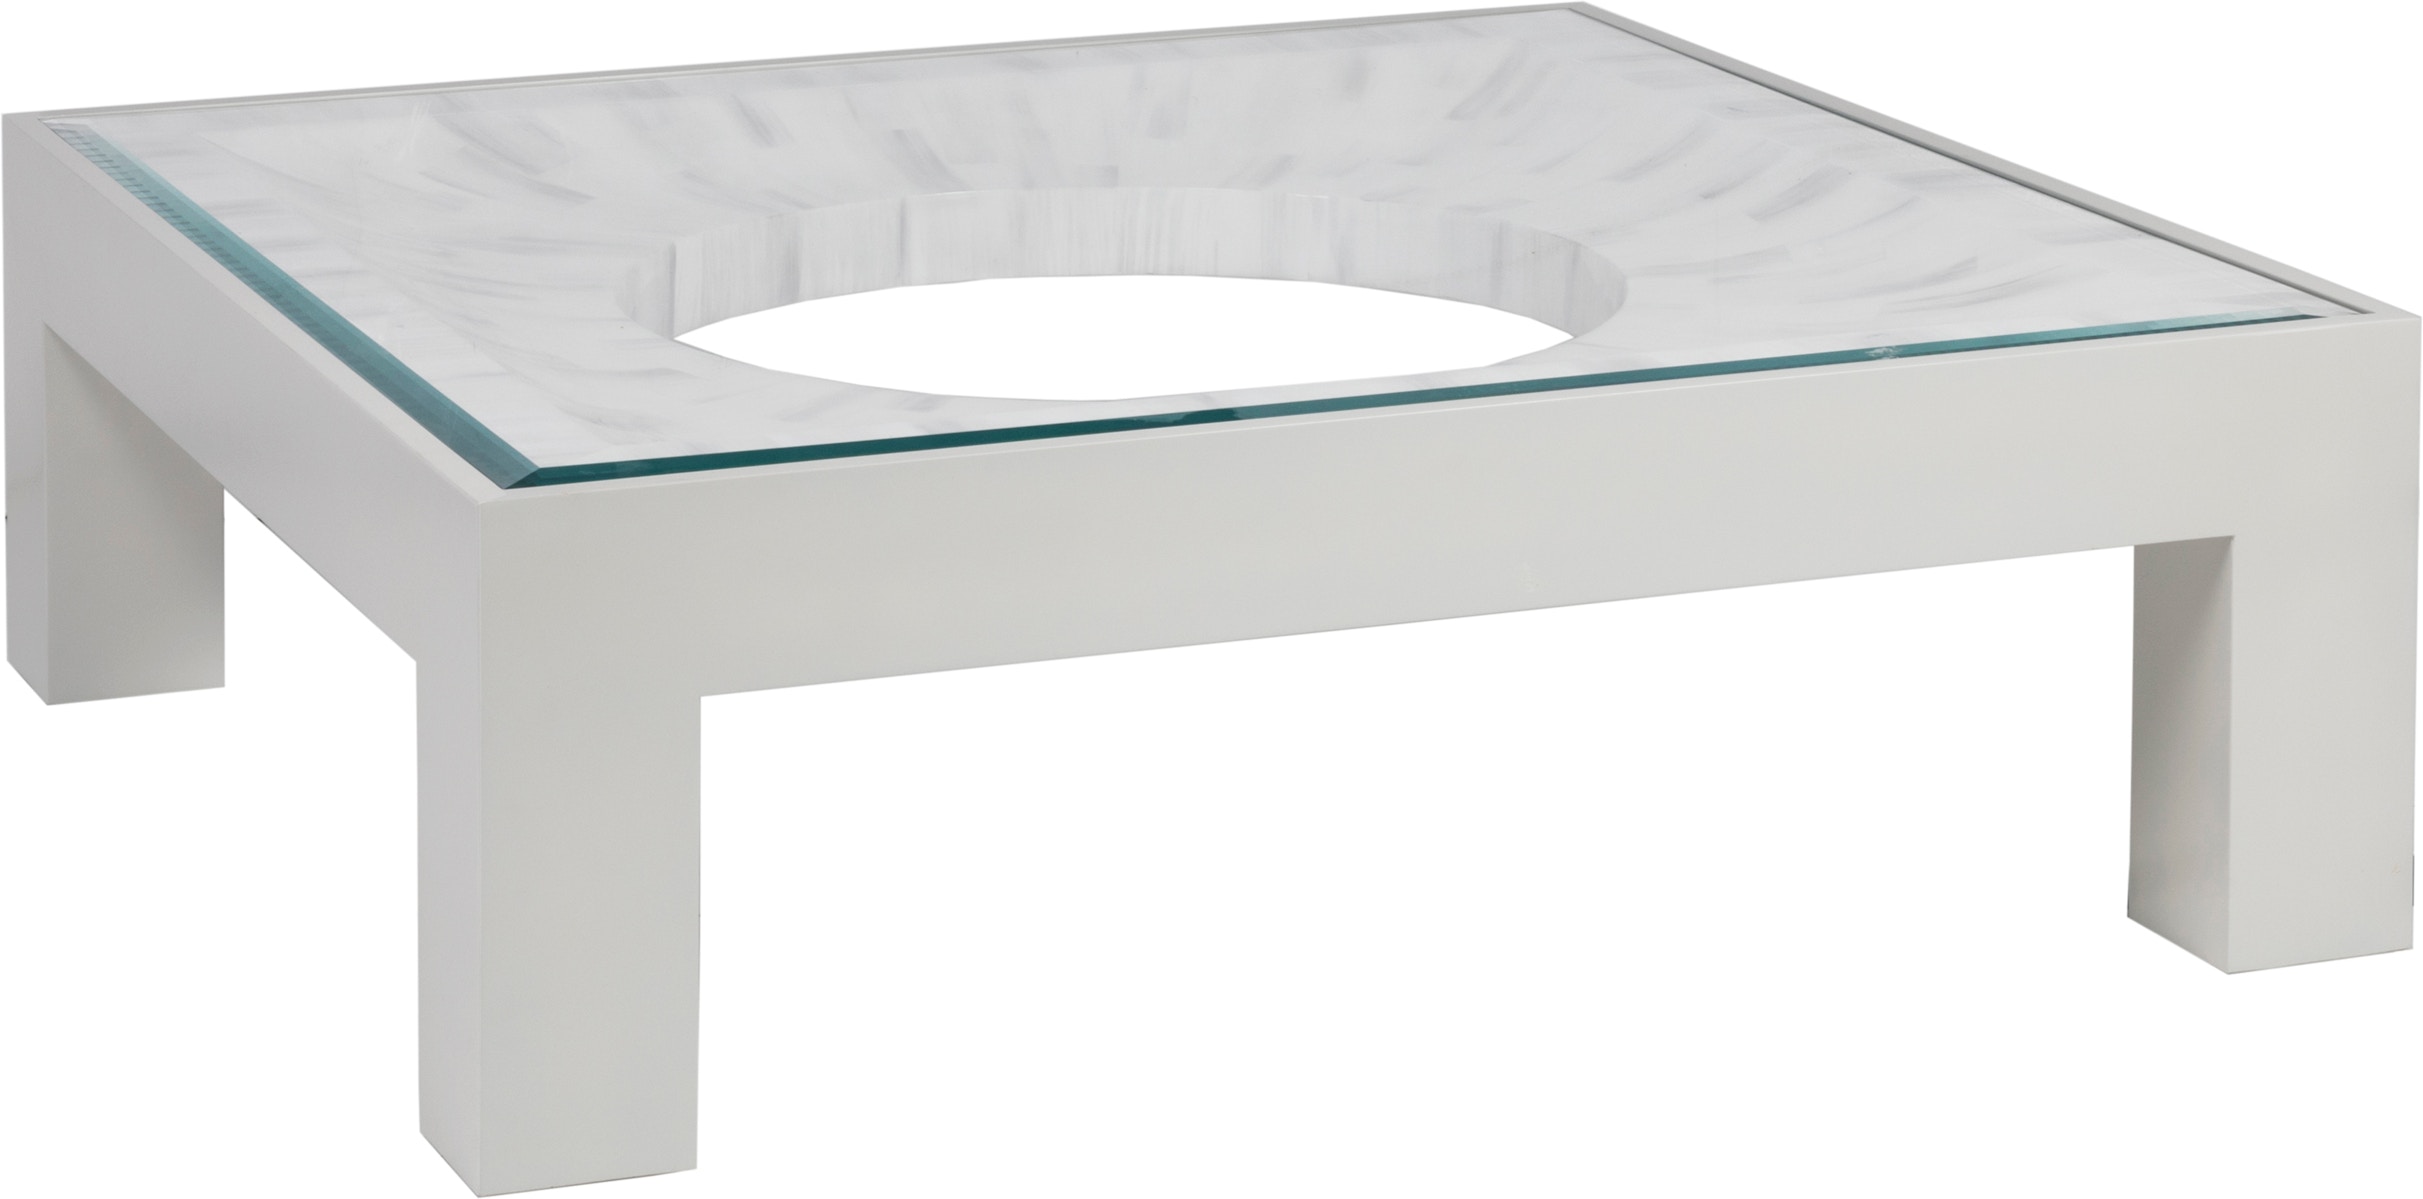 Elation Coffee Table - Bassett Mirror Thoroughly Modern Elston Dining Table With Round Glass Top Rooms For Less Dining Tables / The use of placemats and coasters is recommended for long wear.